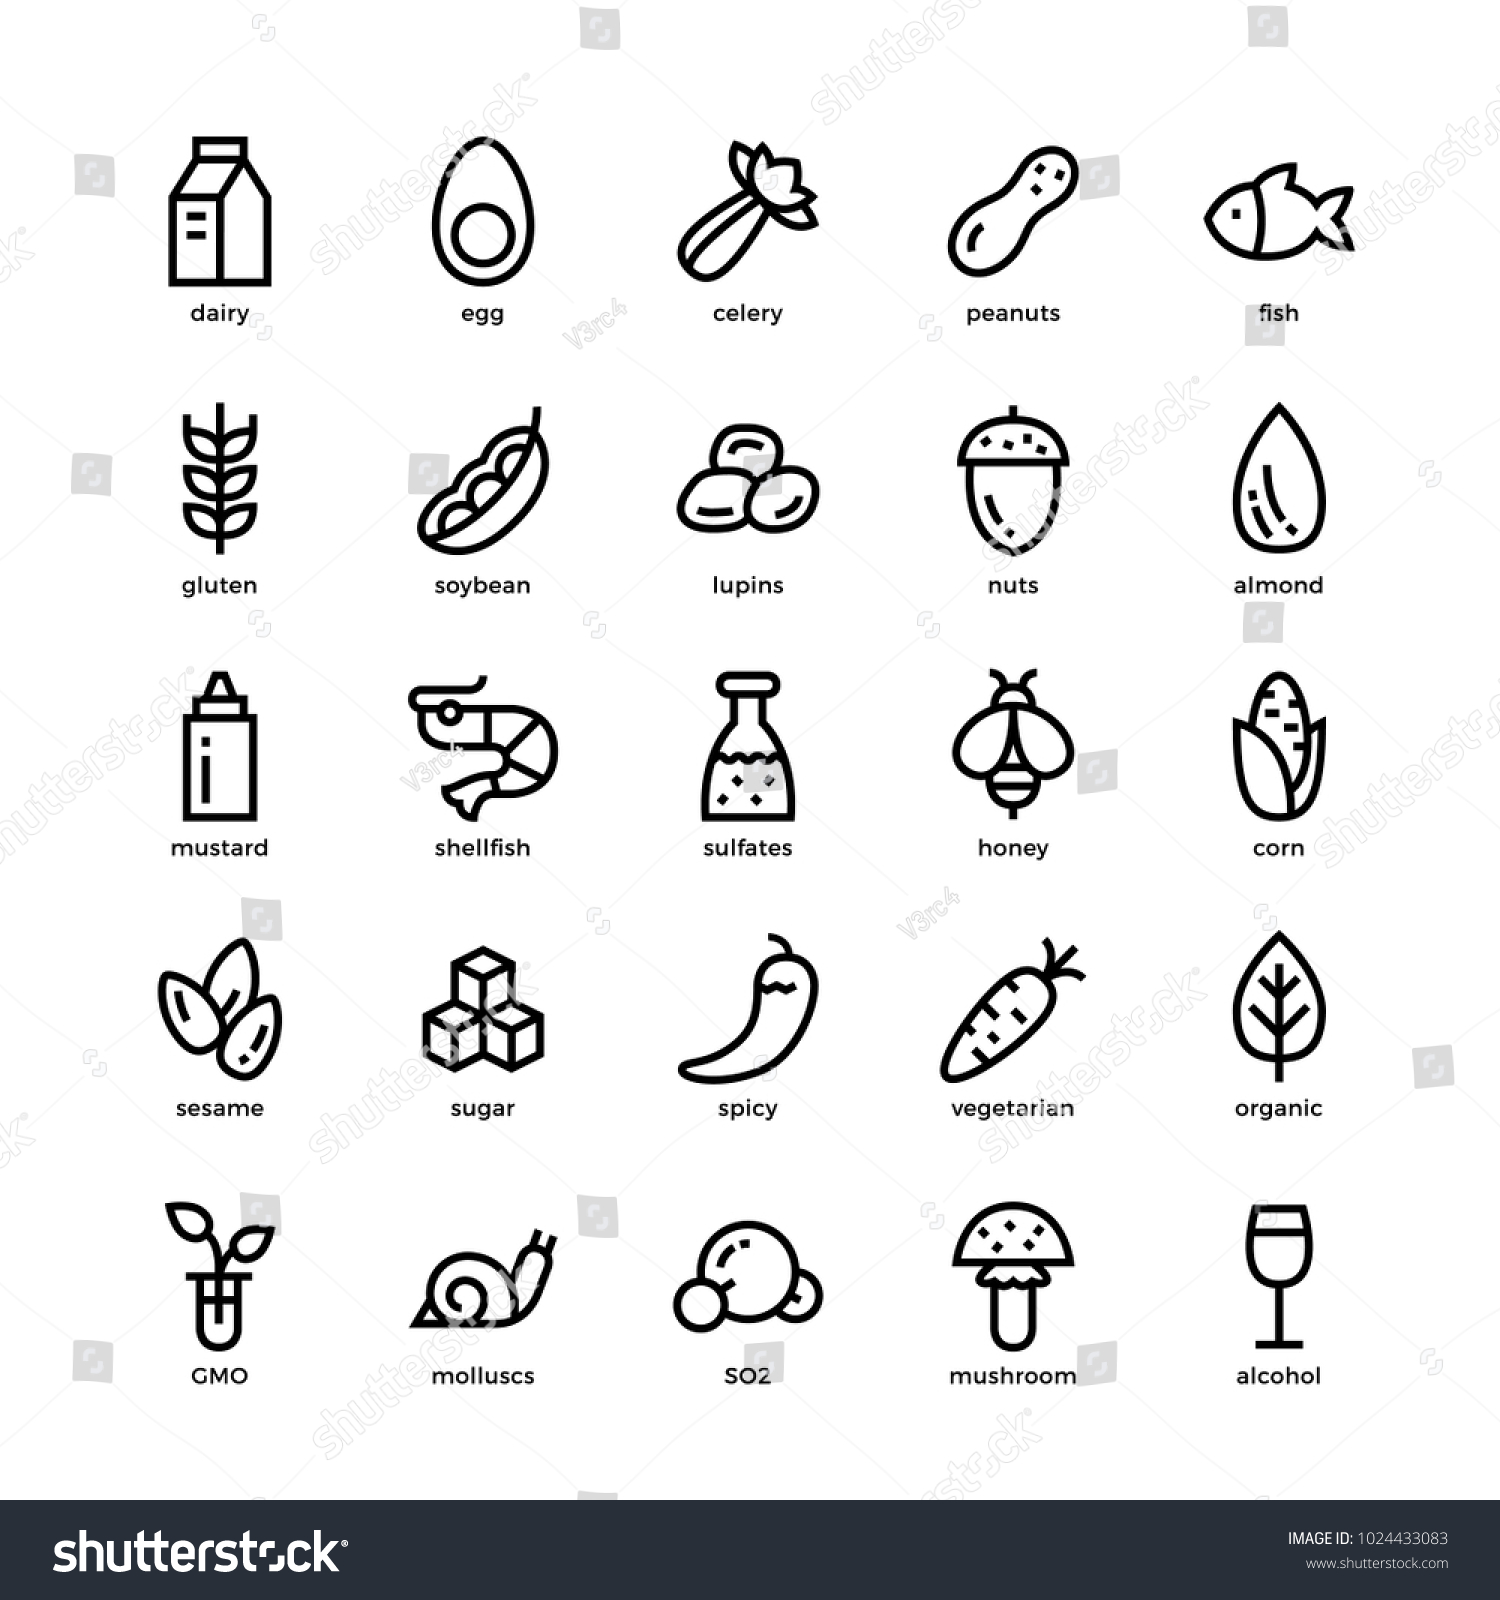 SVG of 25 basic allergens and diet line icons set. Isolated on white background. svg